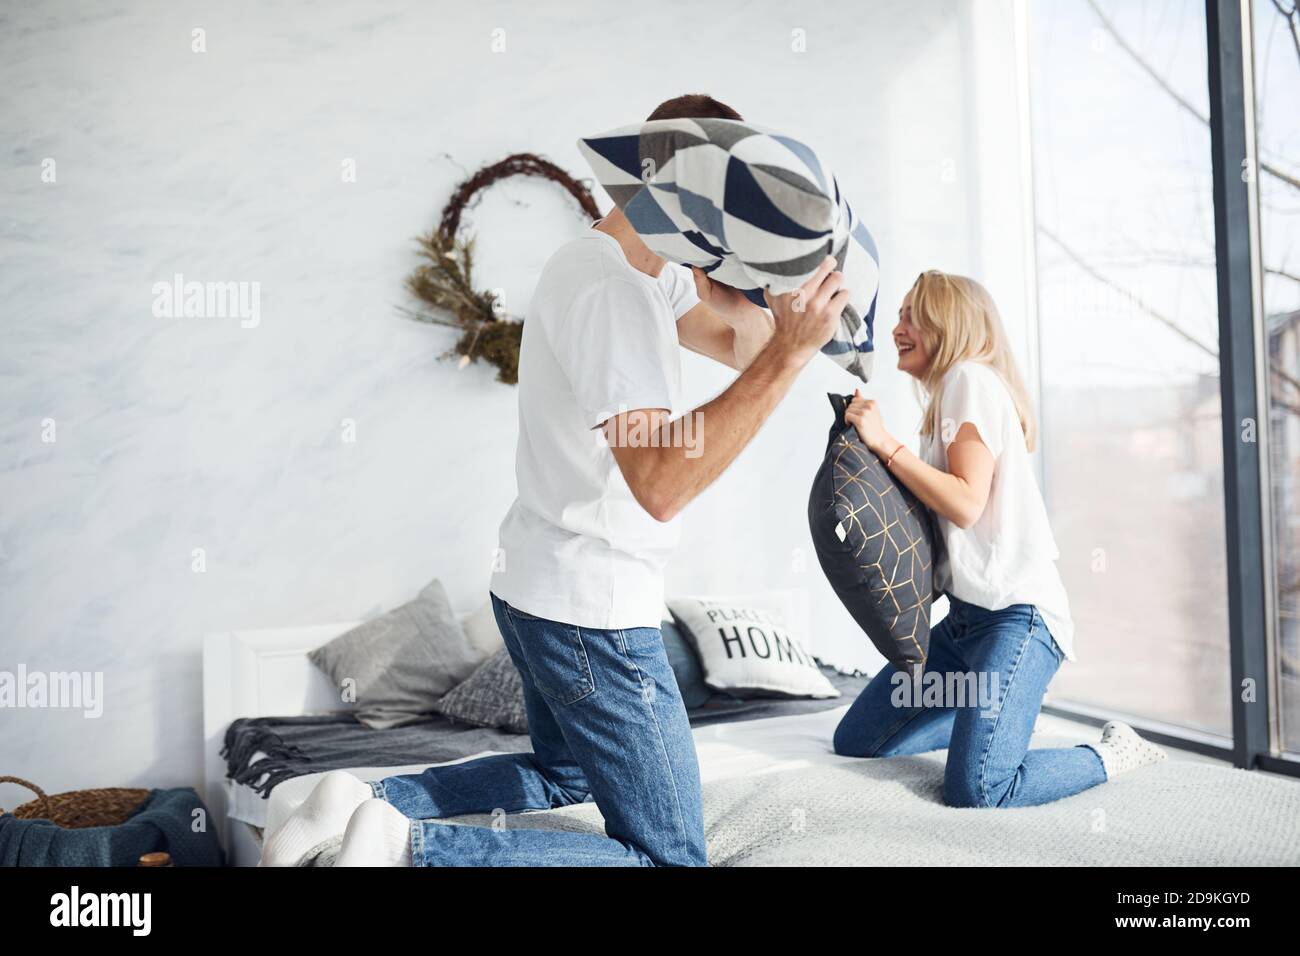 Young lovely couple together at home playing pillow fight in bedroom Stock Photo